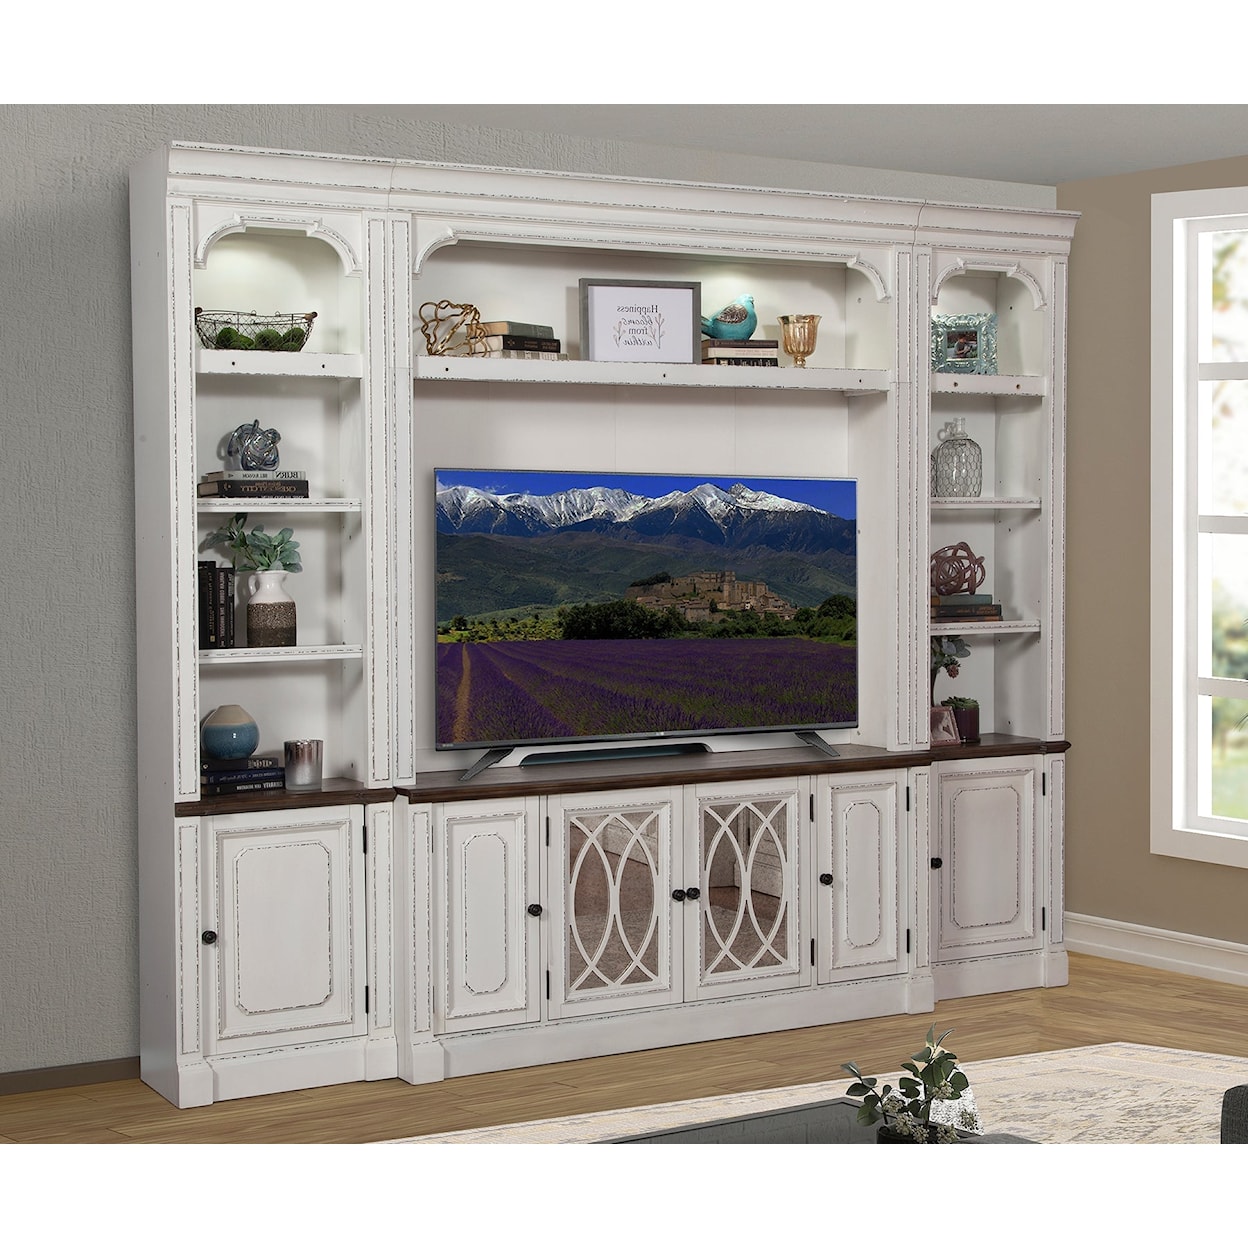 Paramount Furniture Provence Entertainment Wall